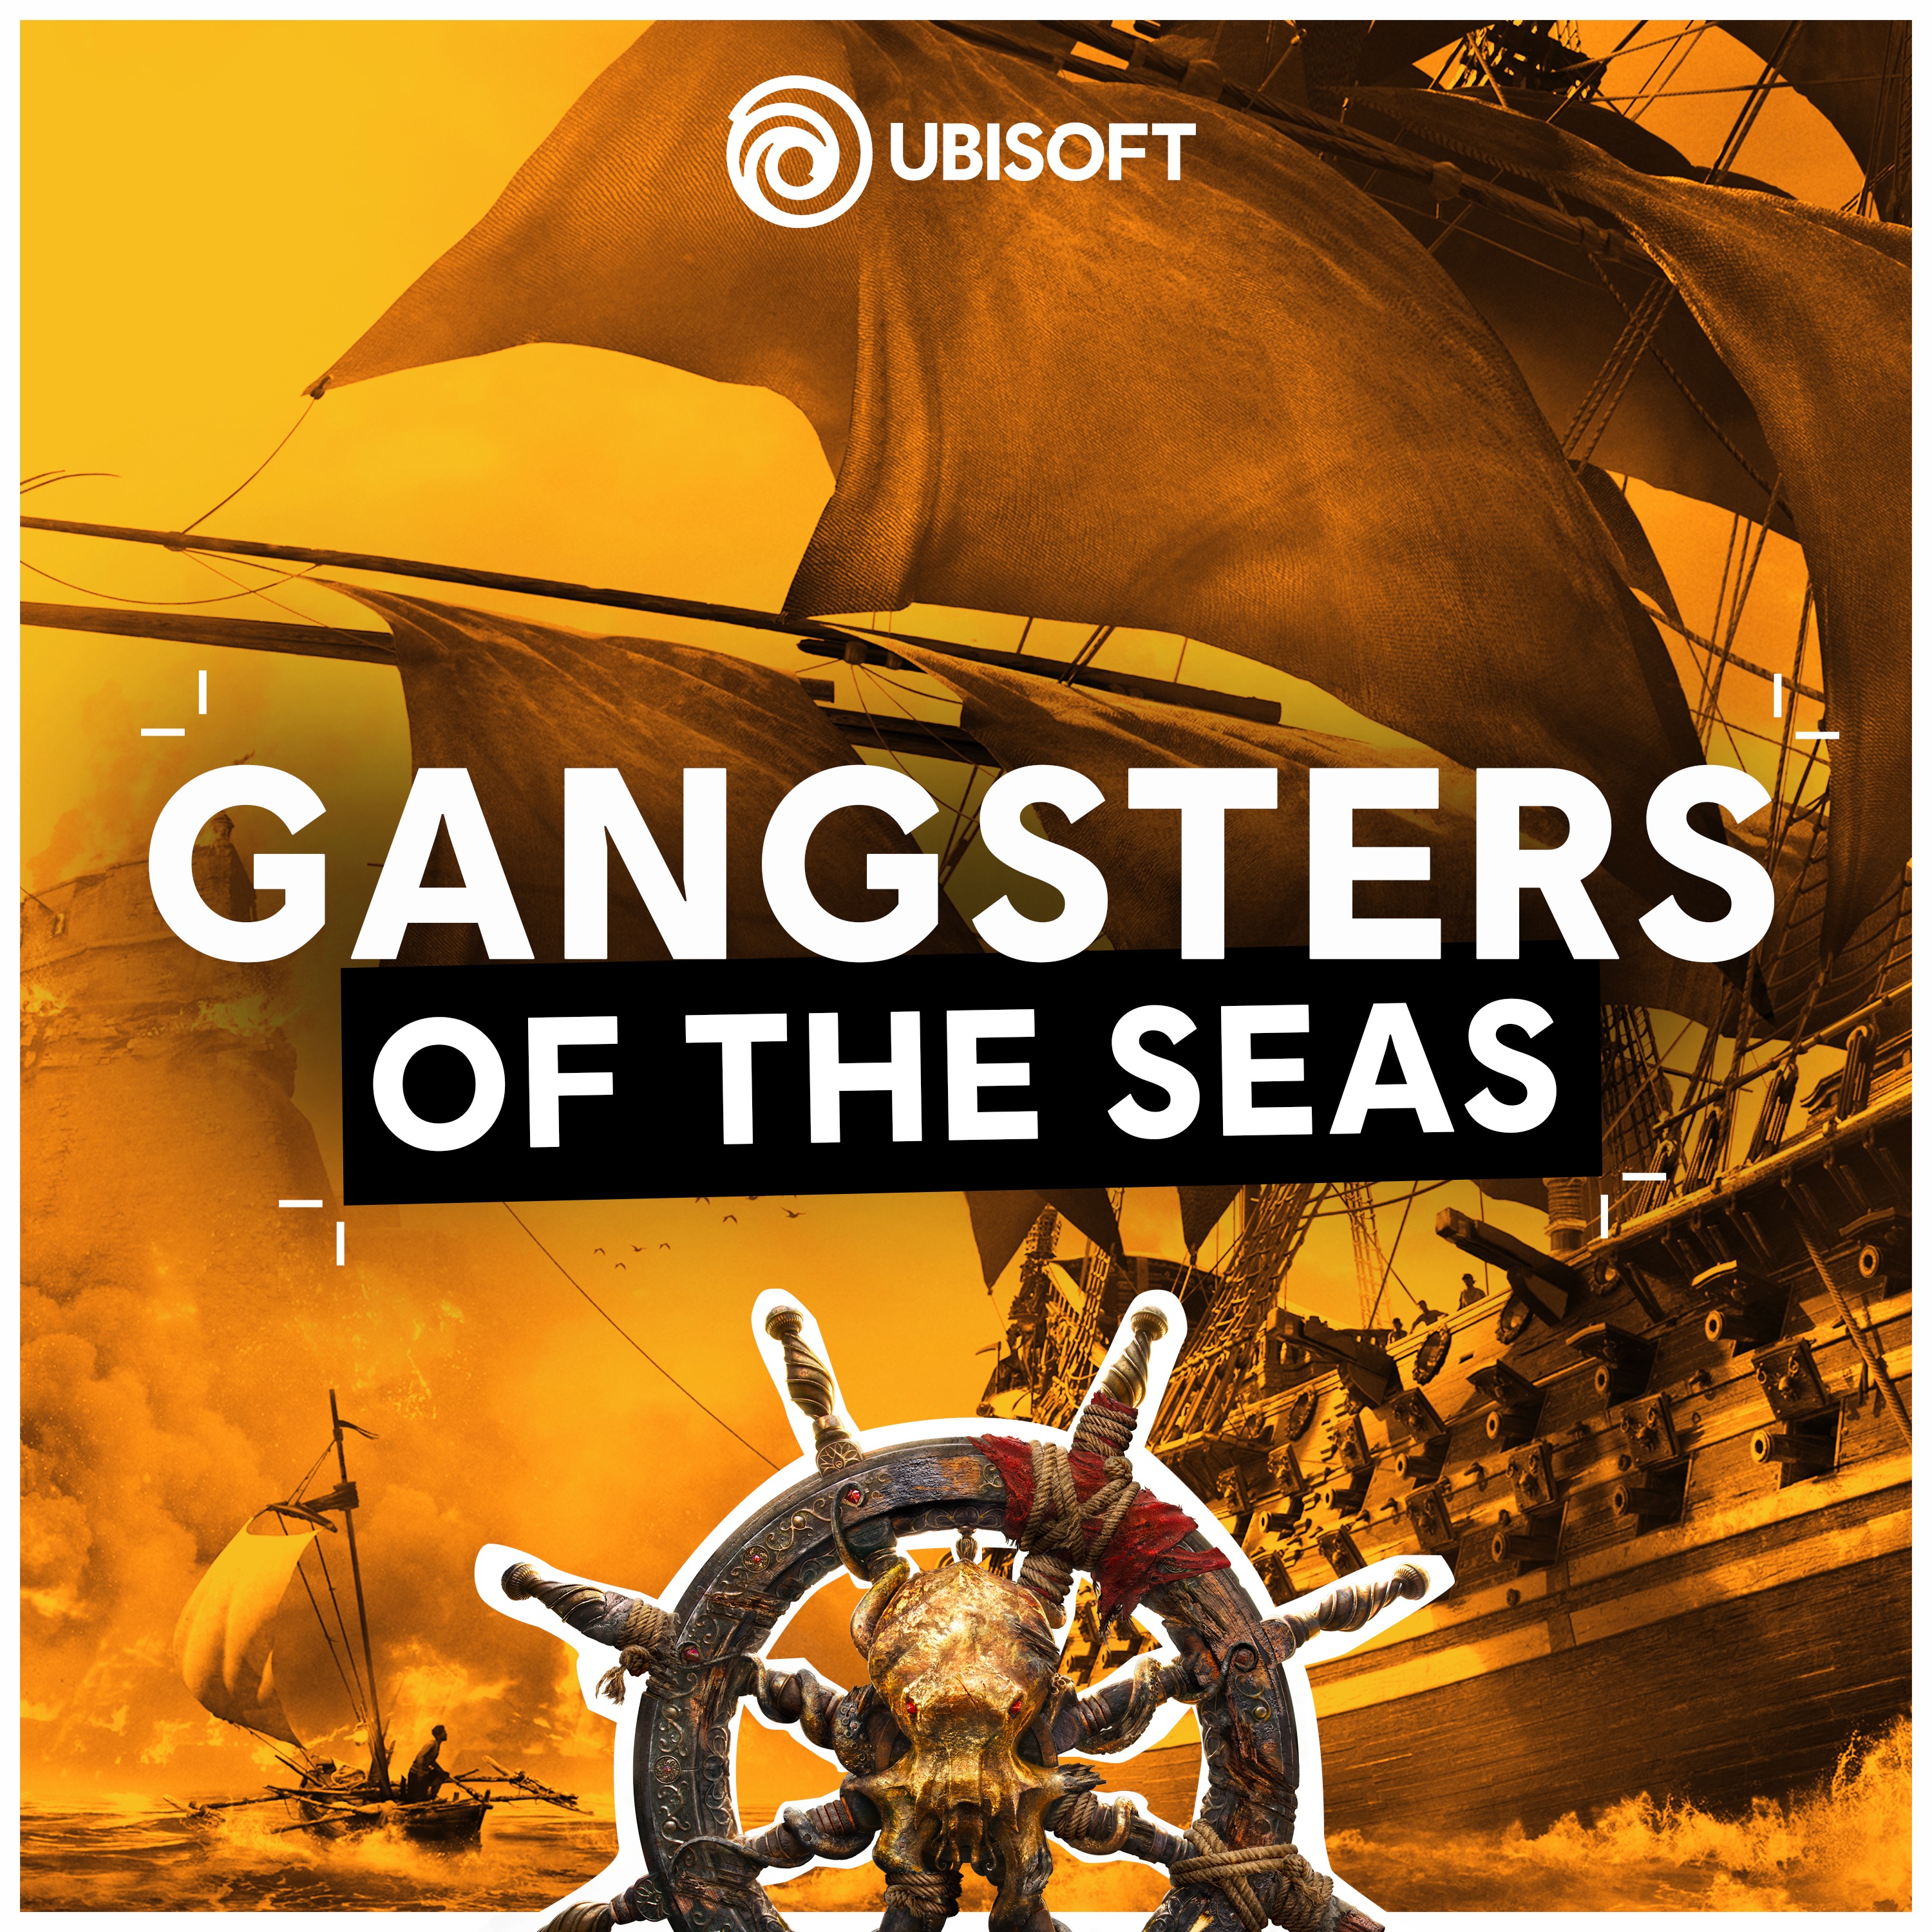 Gangsters of the Seas | EP 1 | Thomas Tew, the pioneer of the East